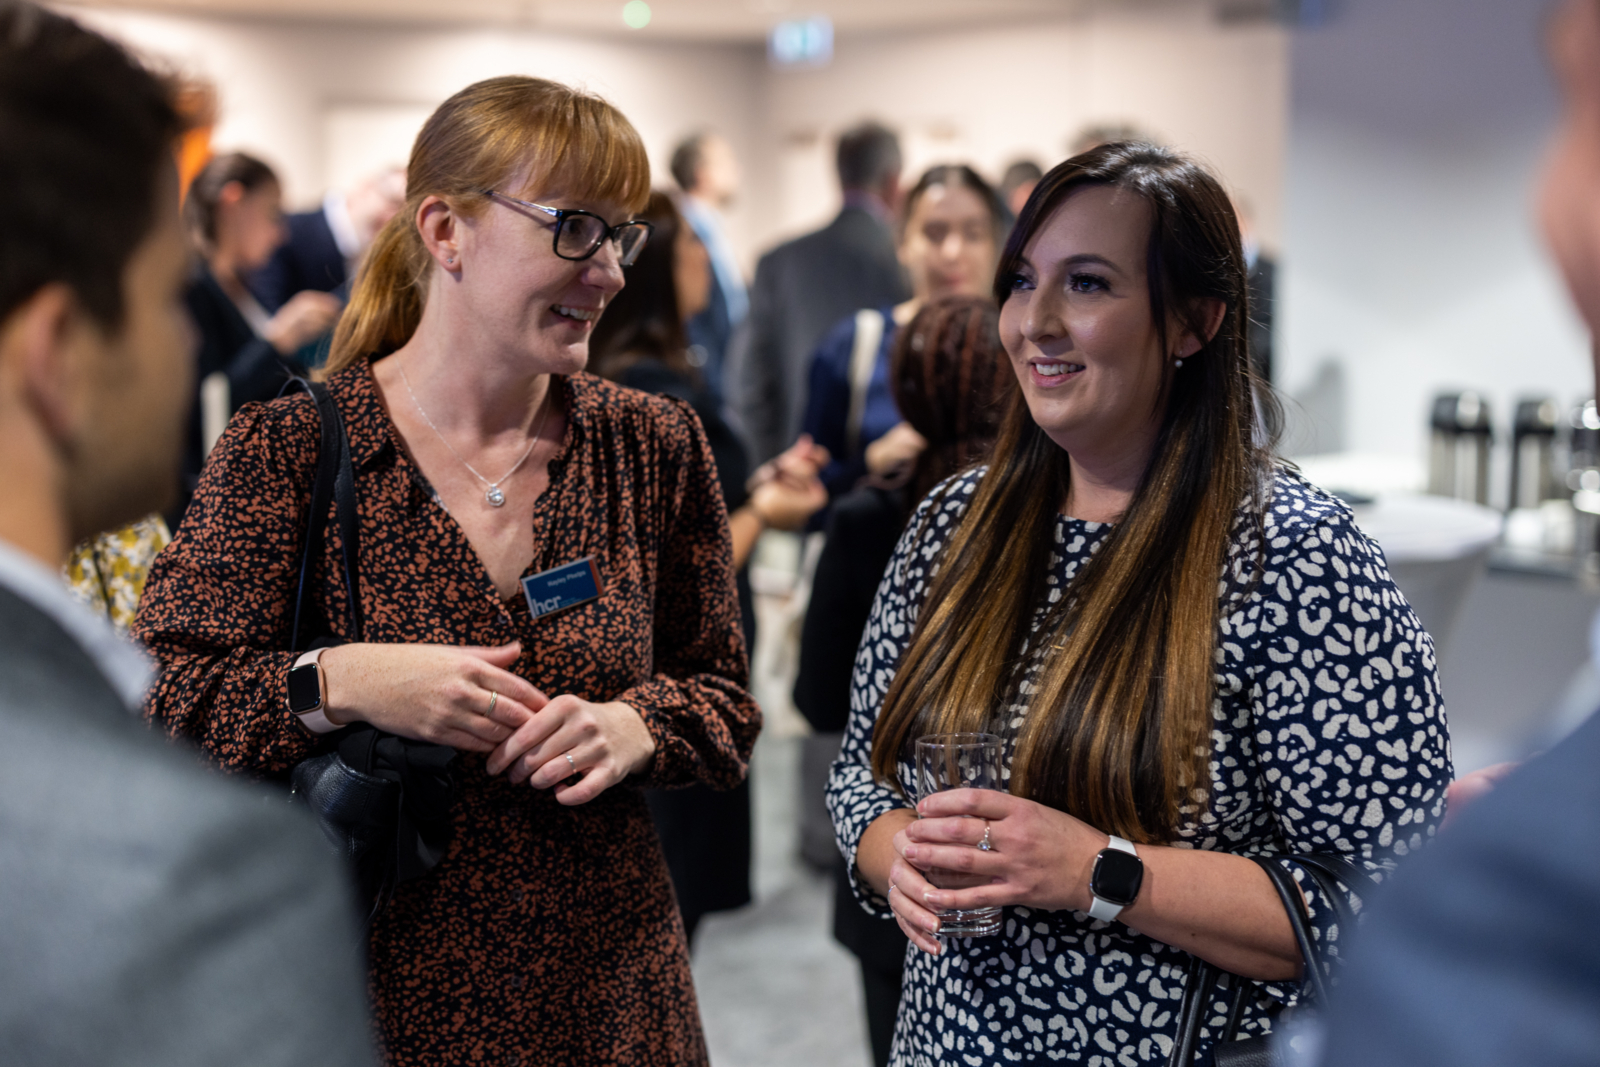 Two people talking at a networking event